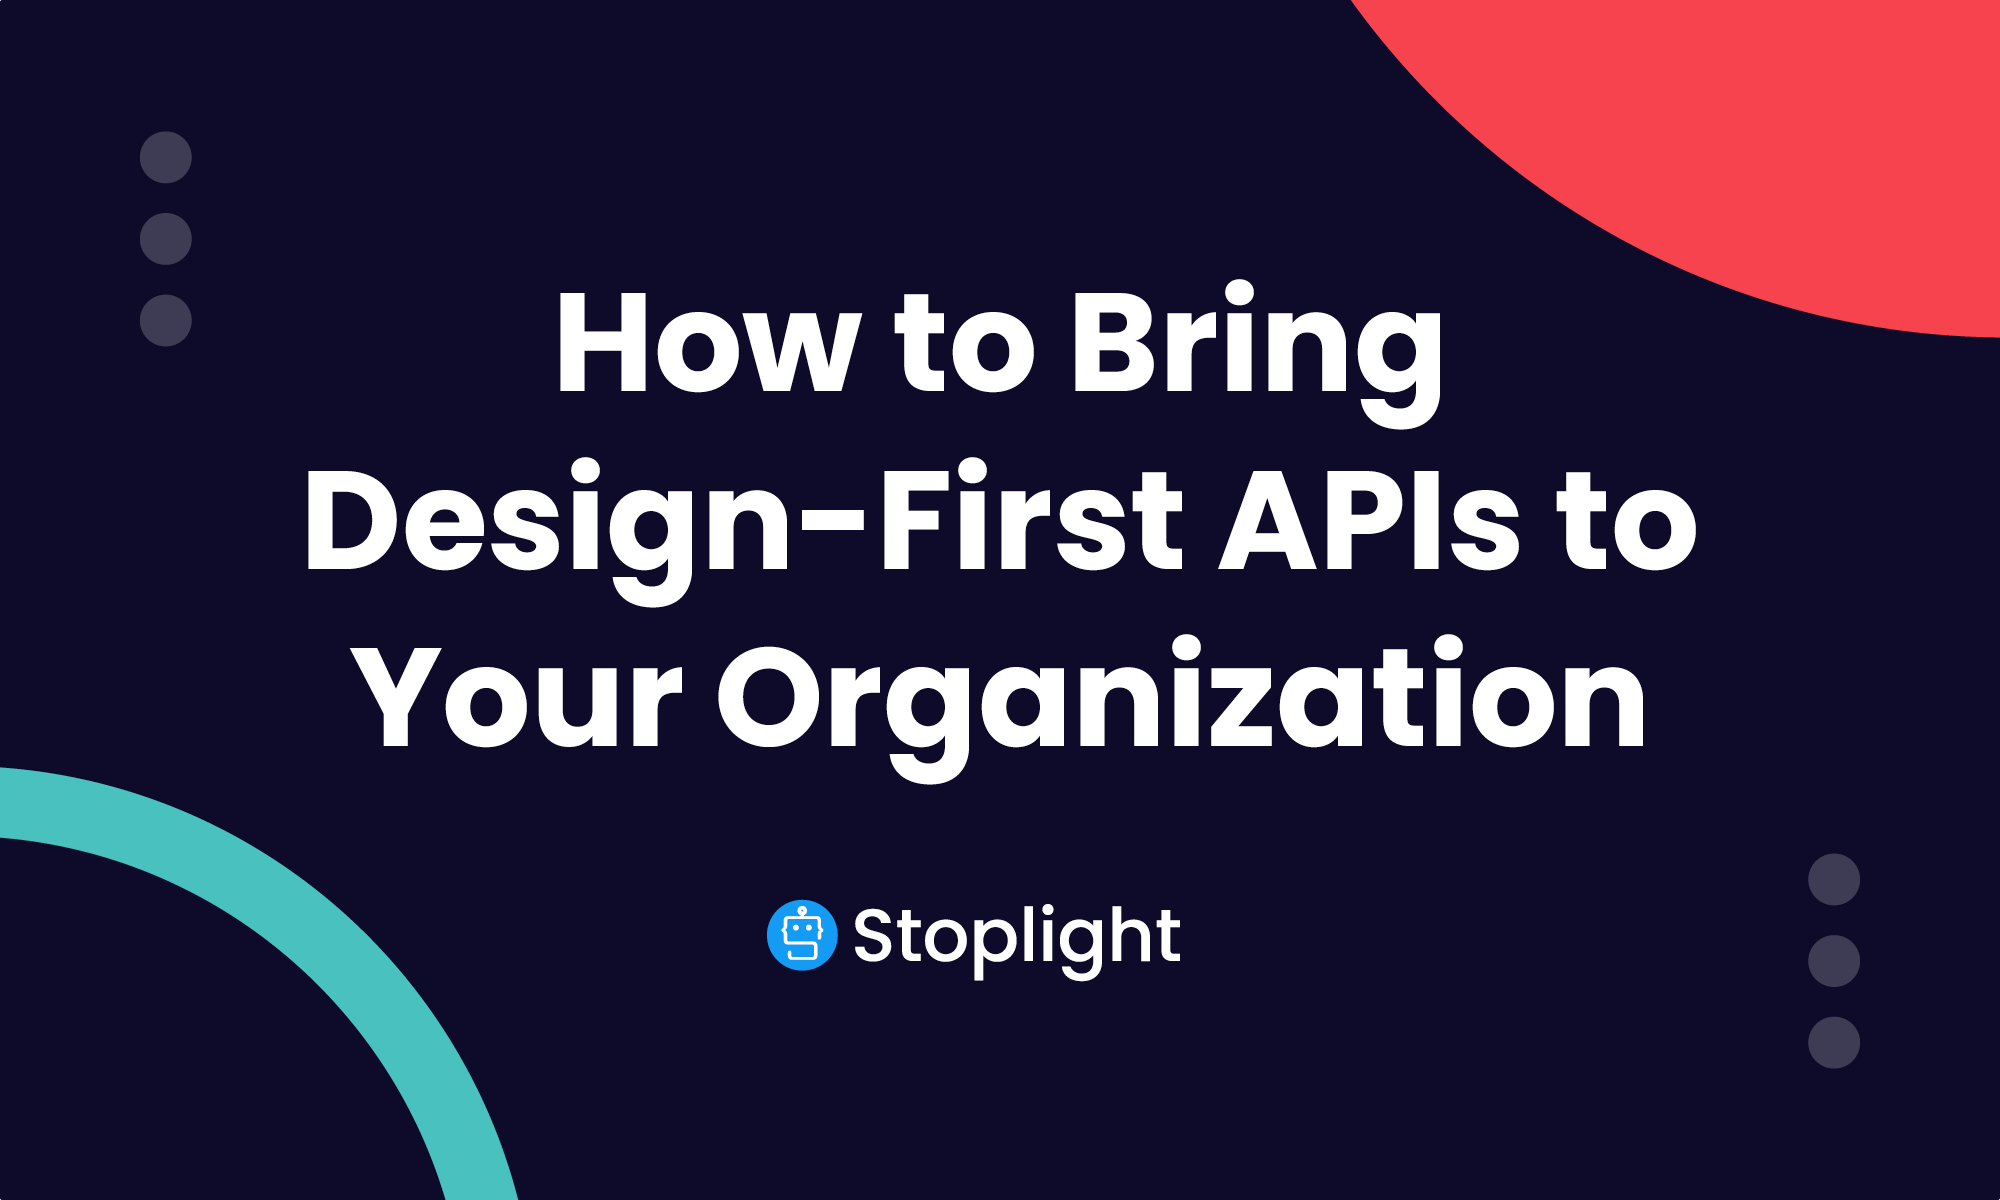 How to Bring Design-First APIs to Your Organization